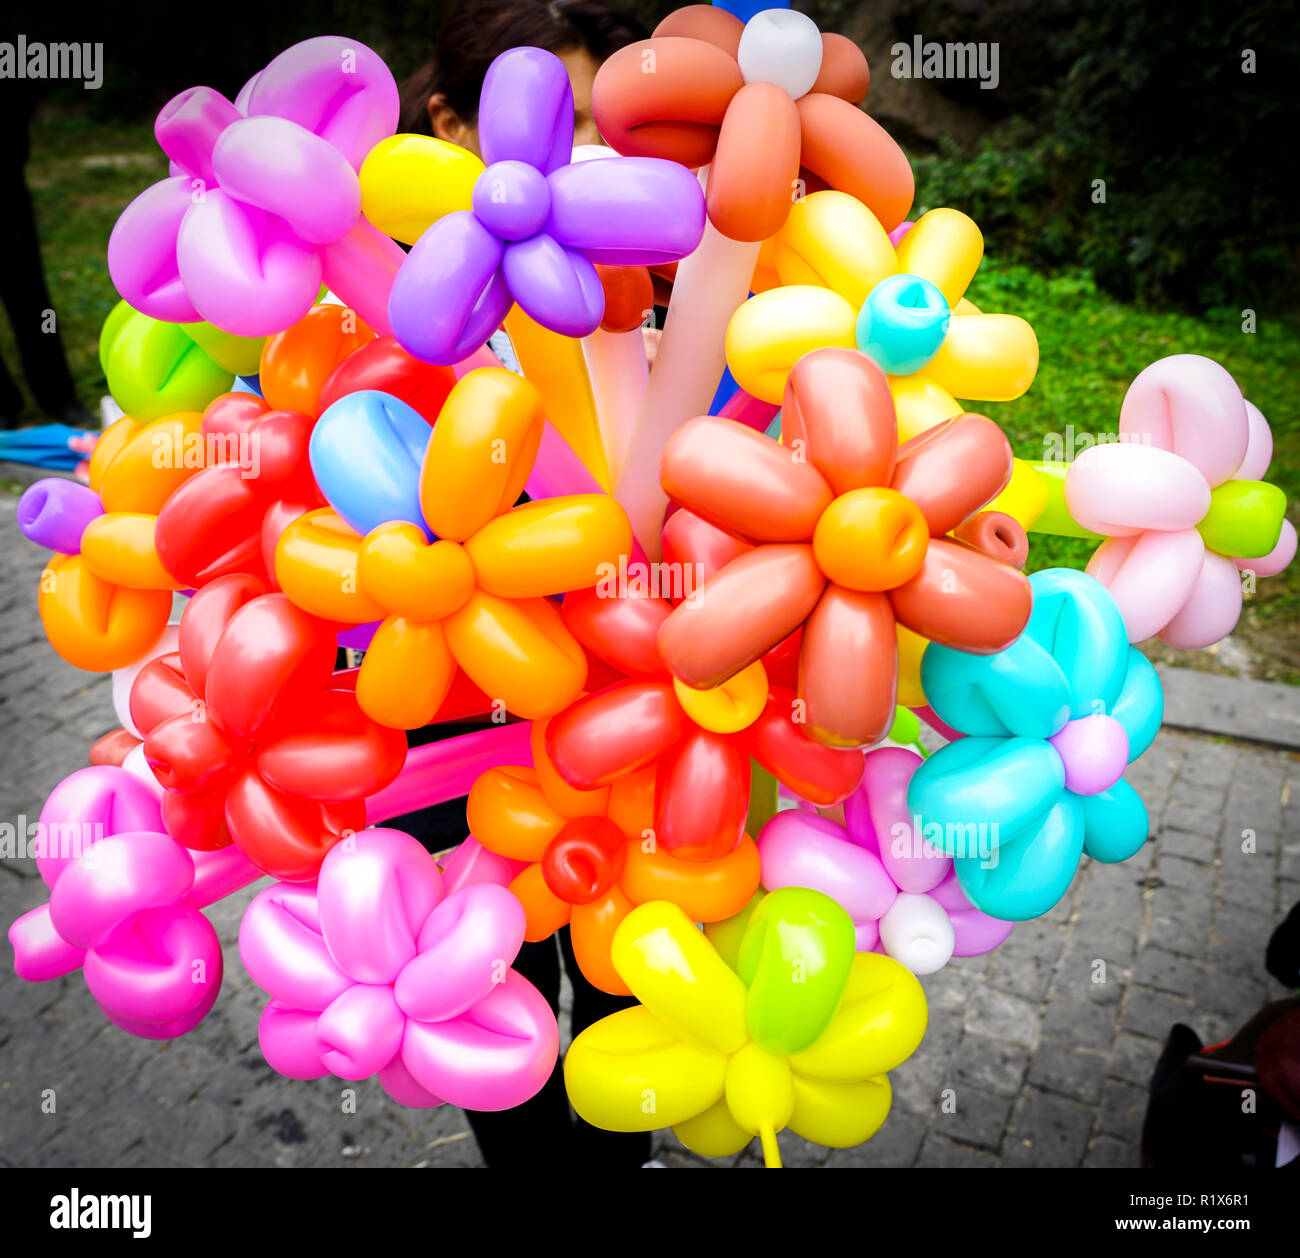 Big bunch of colorful balloons in form of flowers on the streetmarket Stock Photo